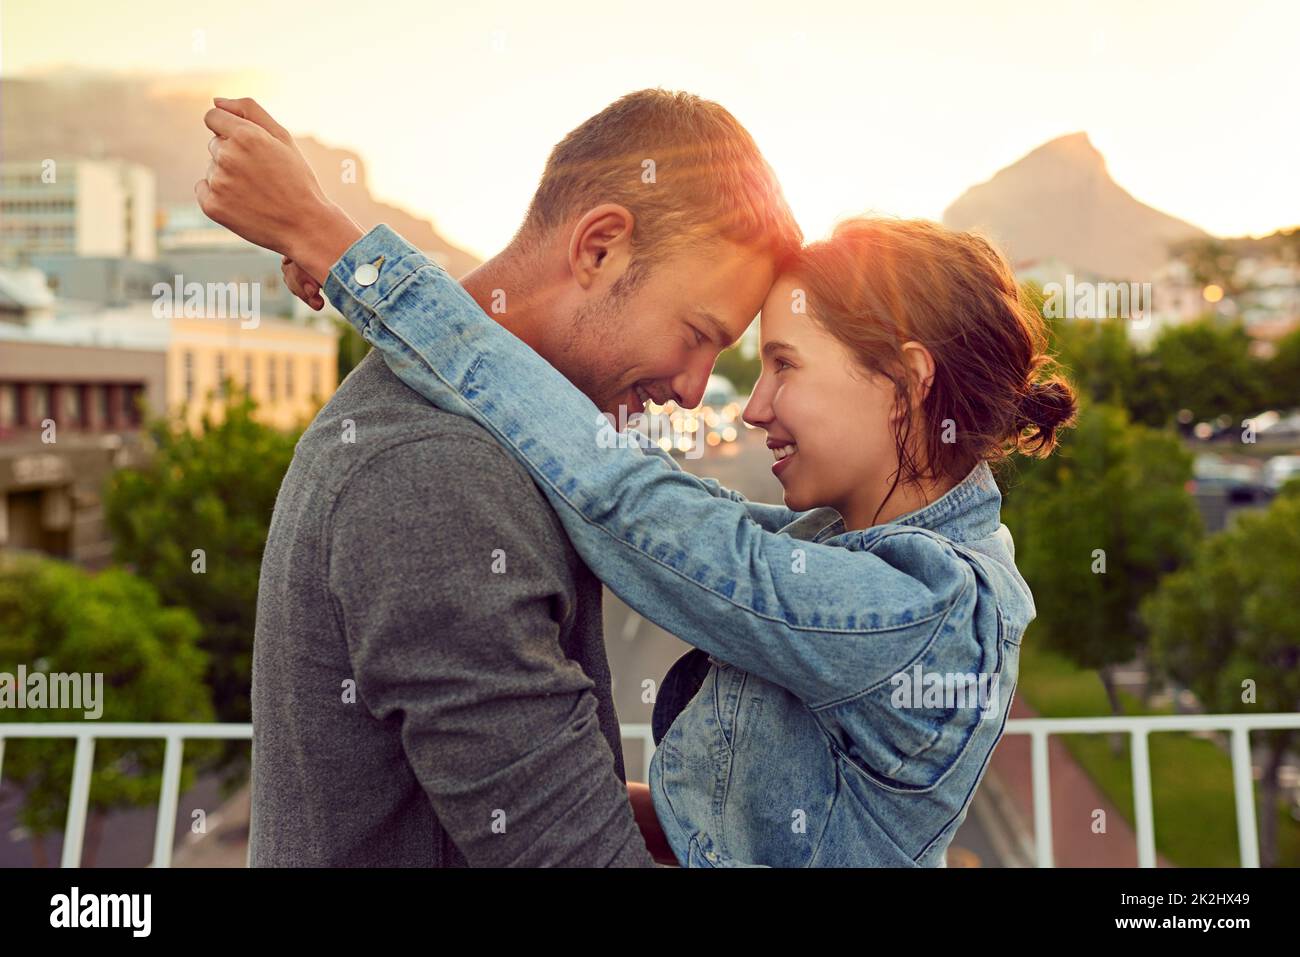 Sunset sentiment. Shot of a happy young couple enjoying a romantic moment in the city. Stock Photo